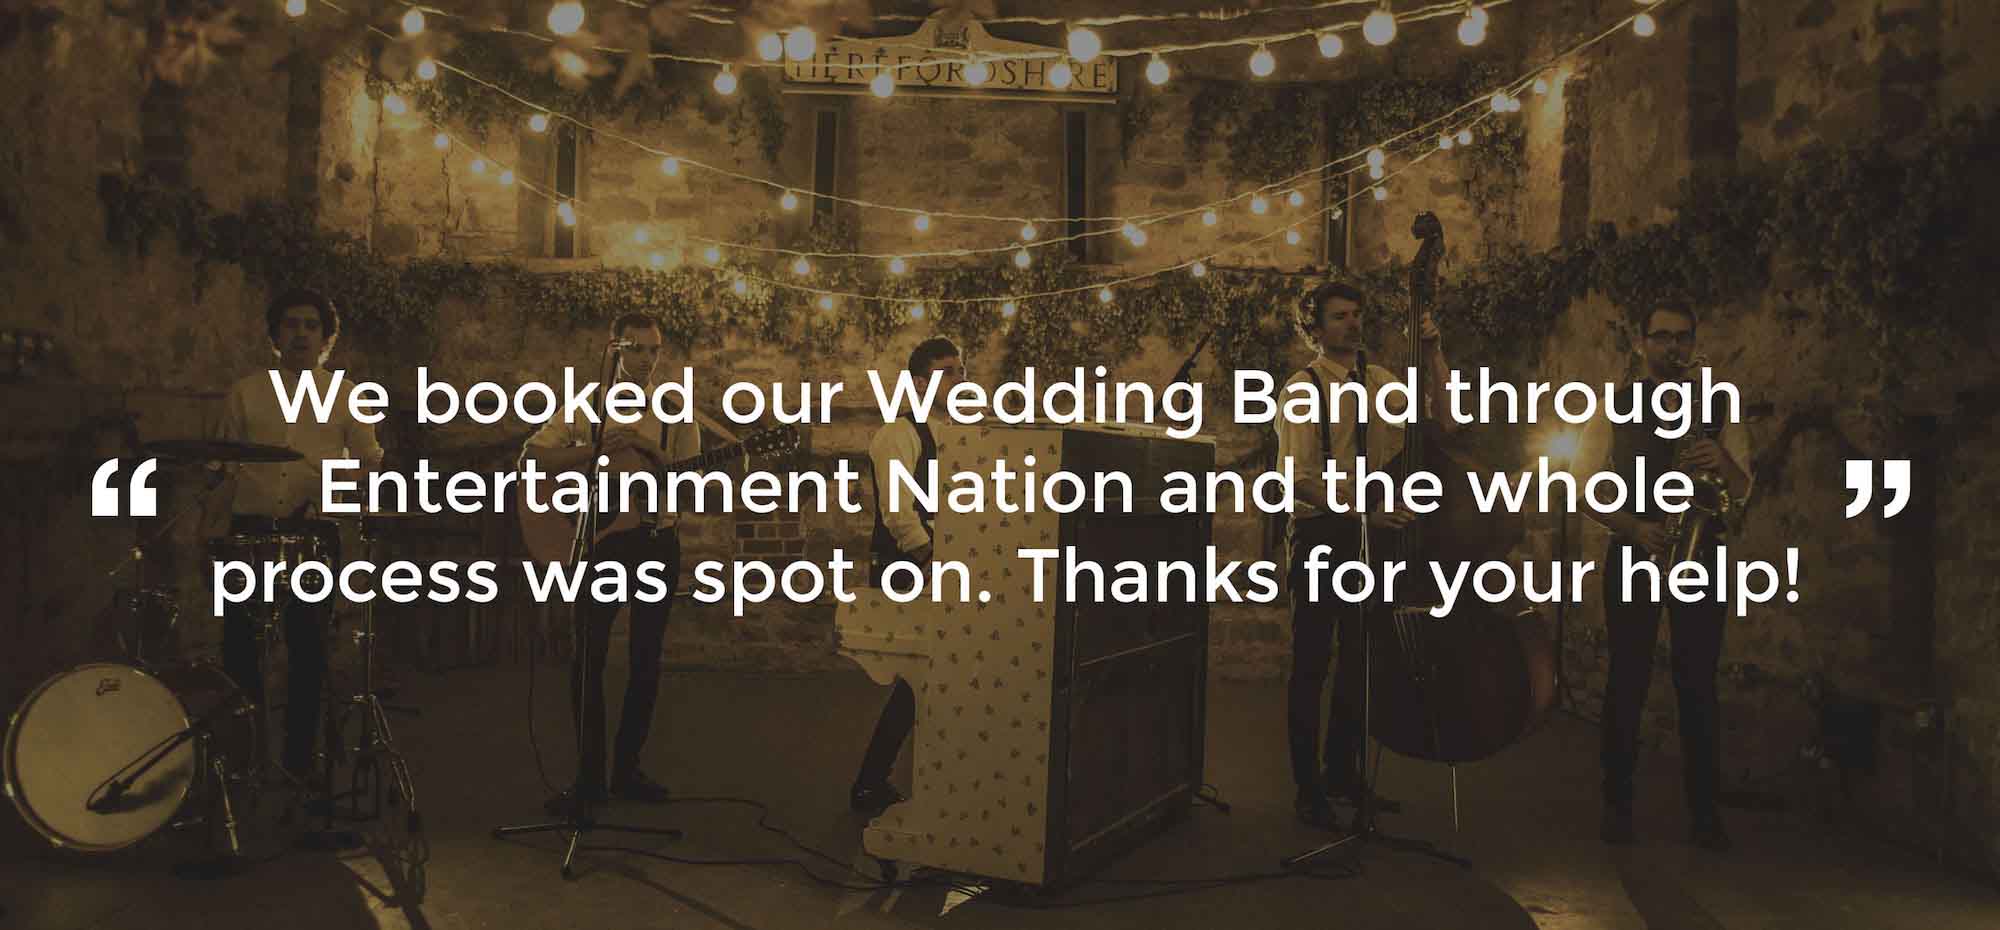 Client Review of a Wedding Band West Yorkshire